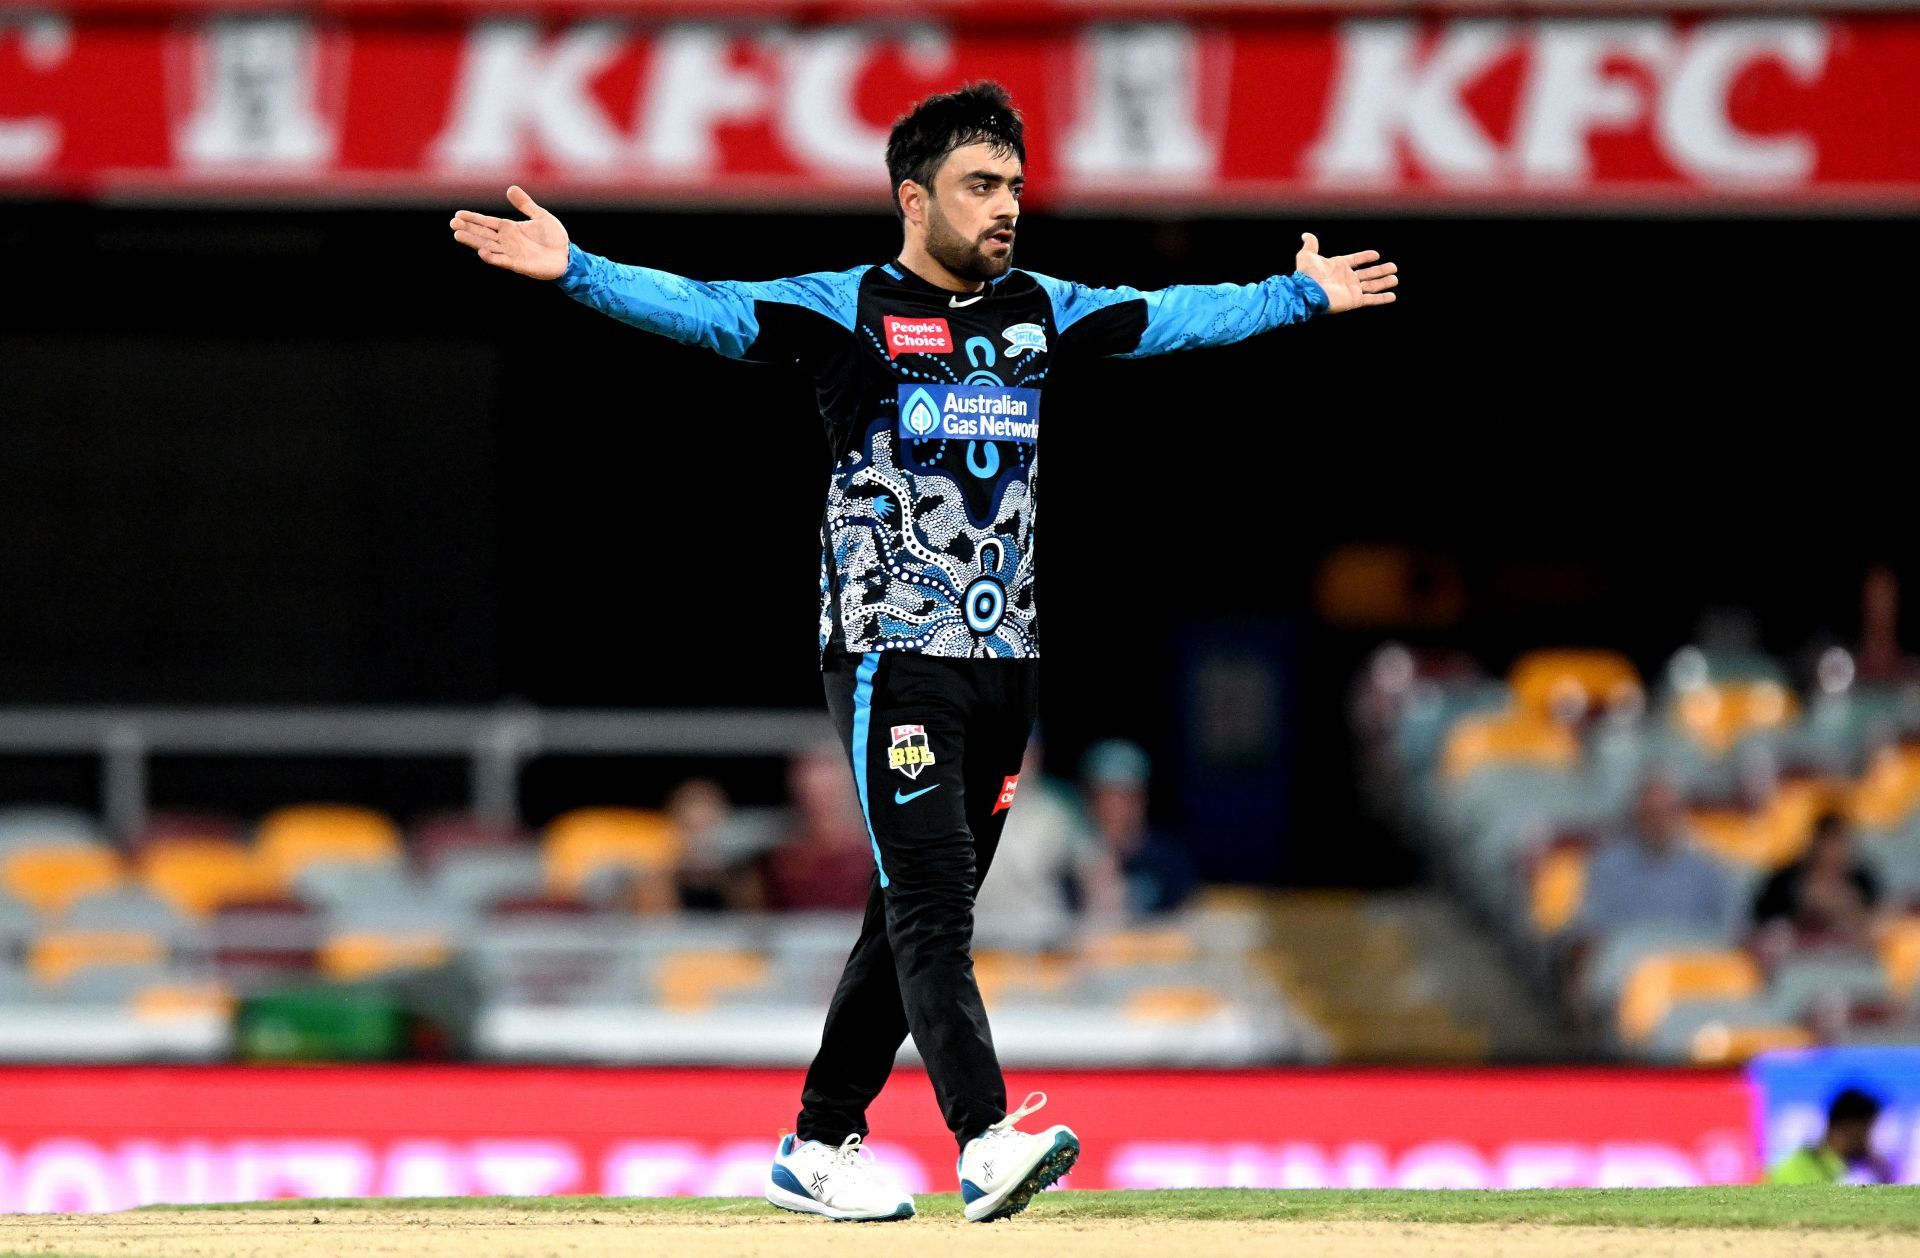 Adelaide Strikers are likely to keep a hold of Rashid Khan with their solitary retention pick